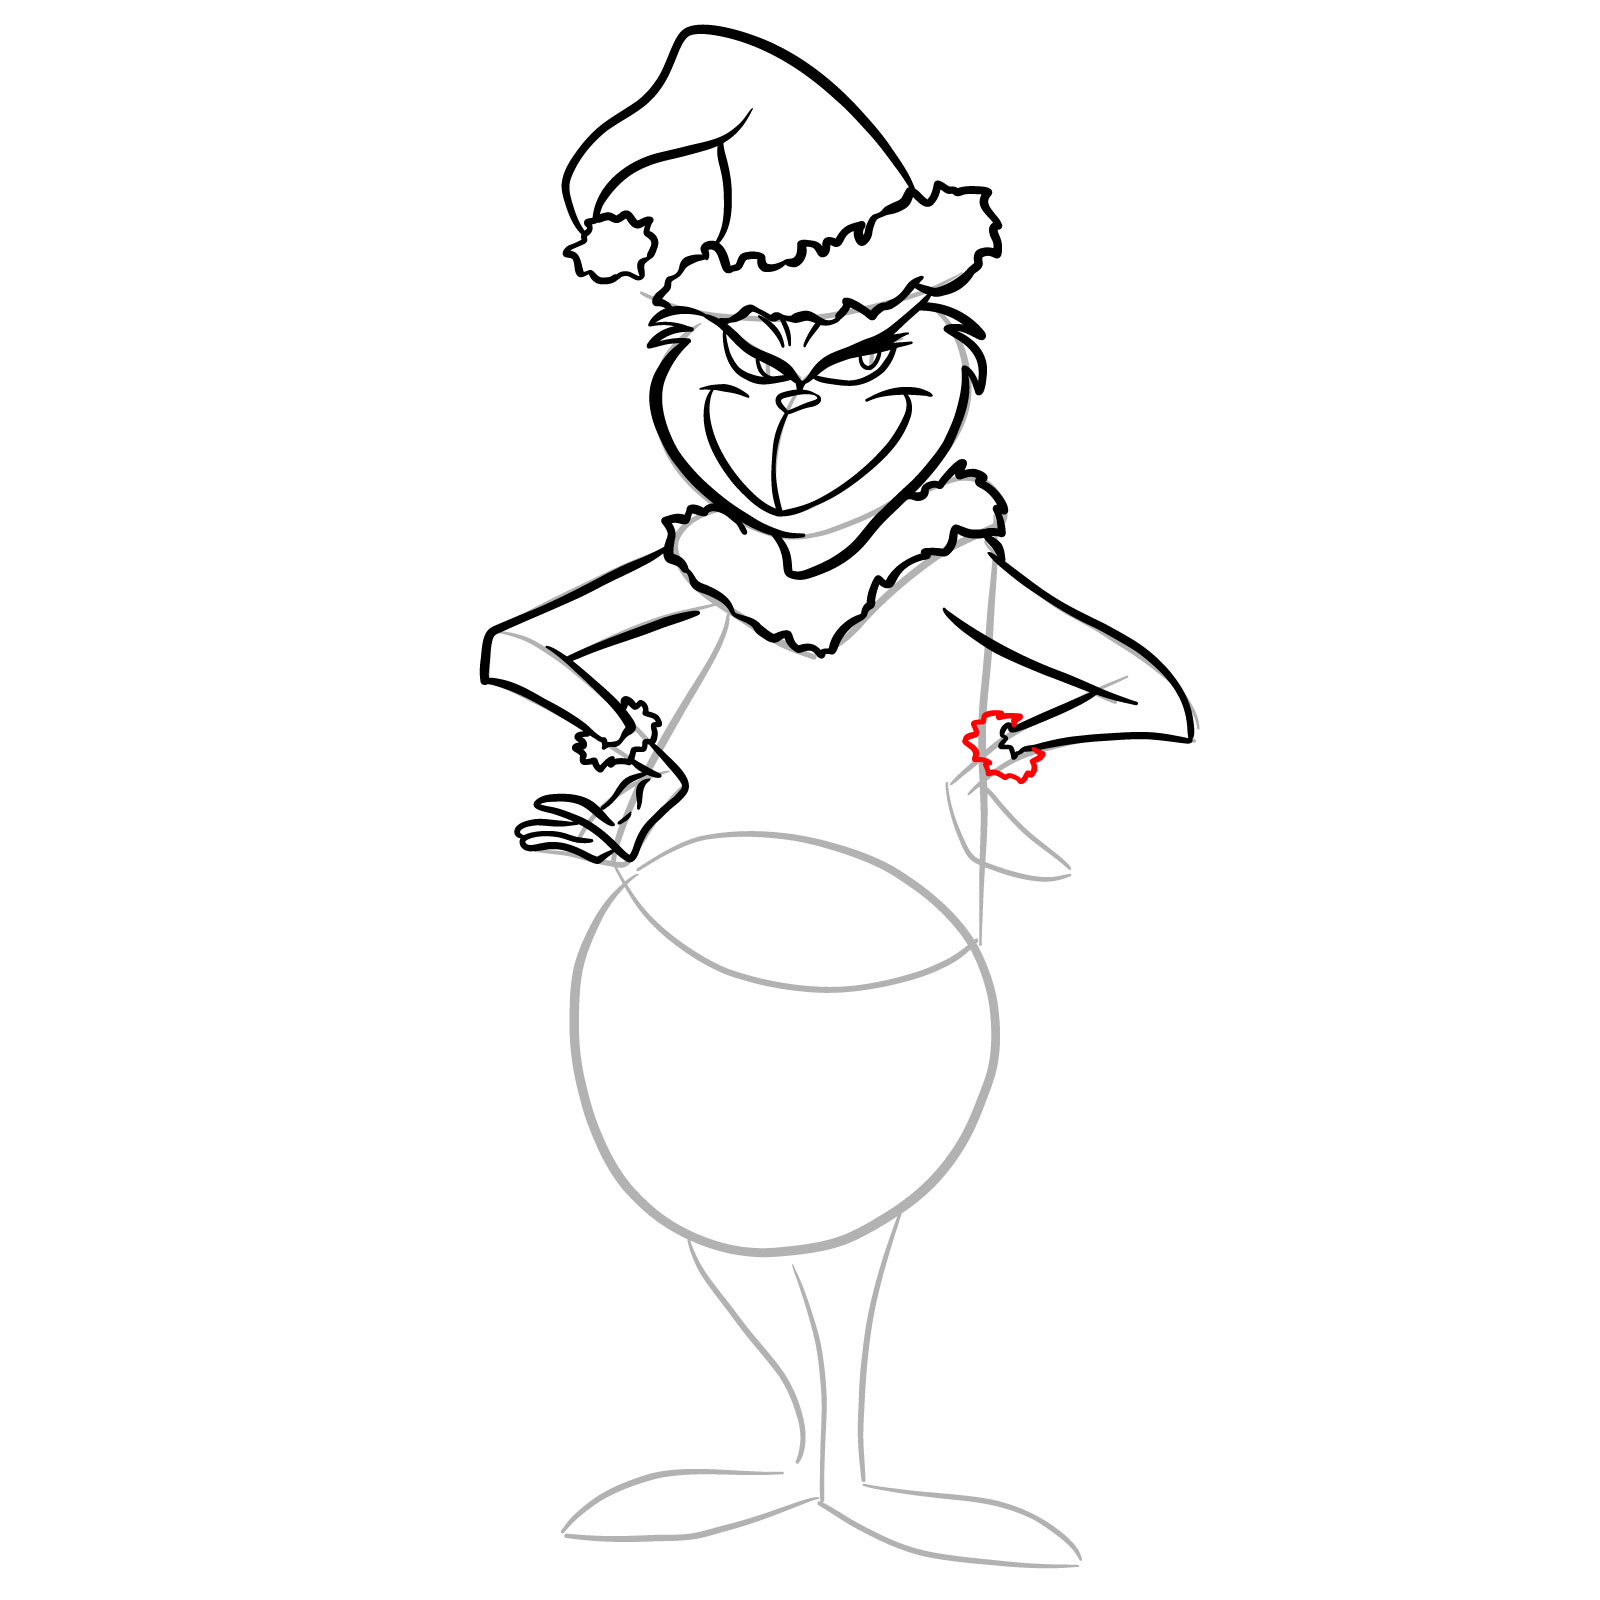 How to draw The Grinch in a Christmas costume - step 18